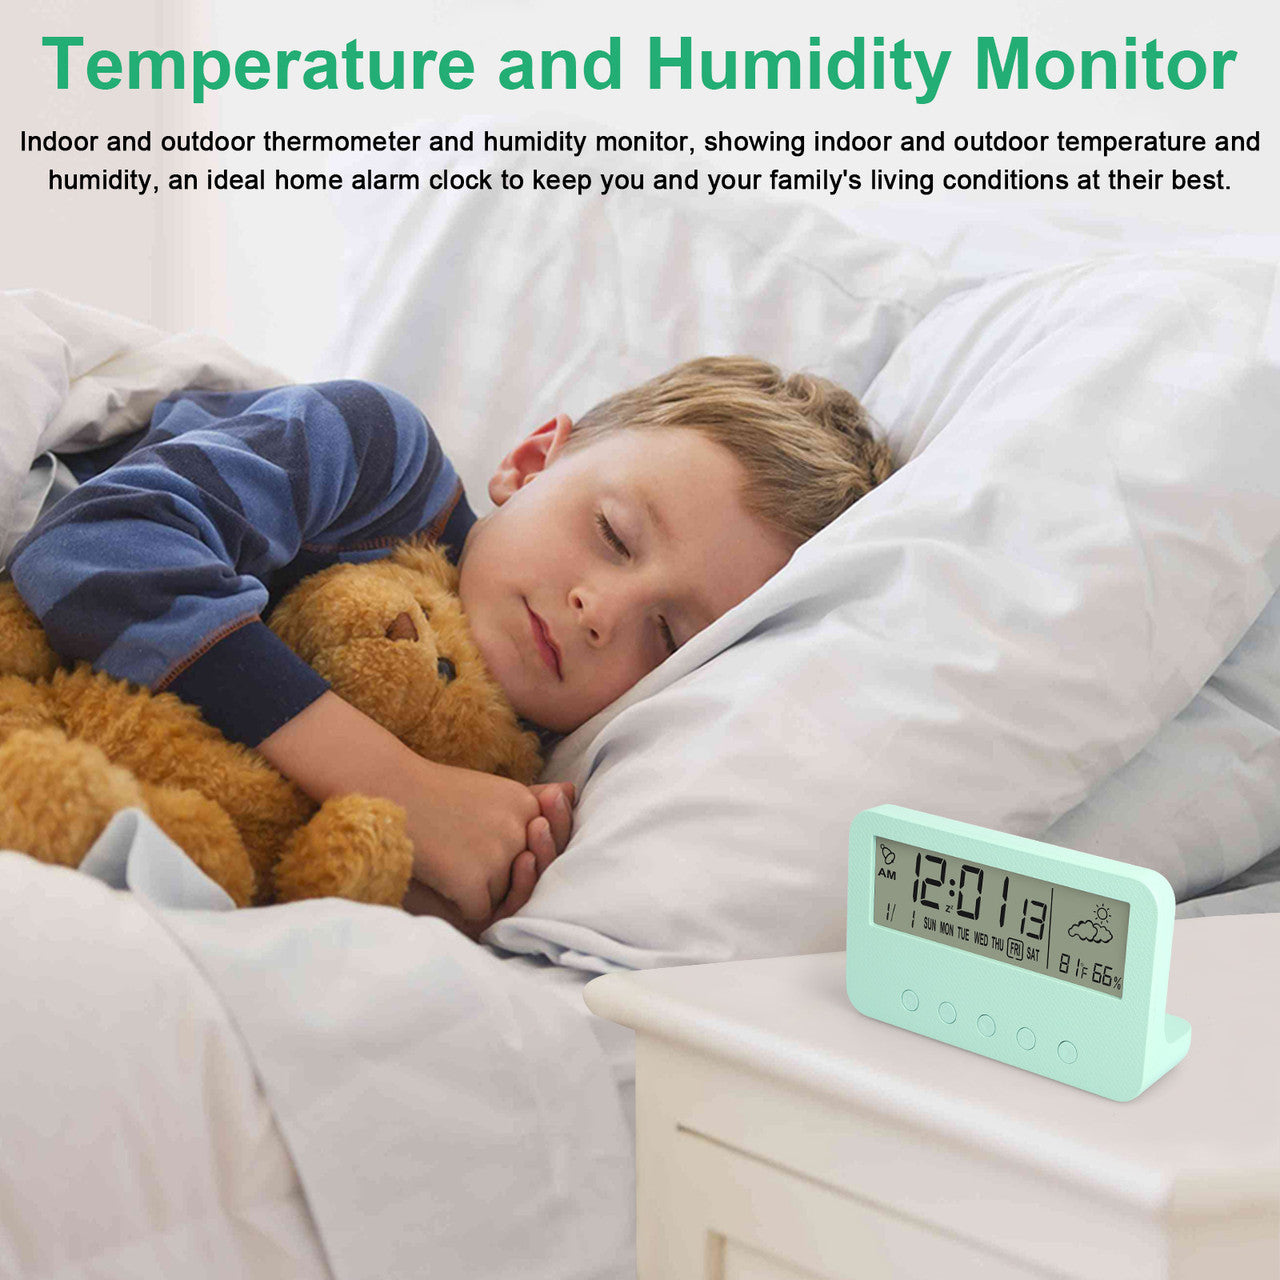 Luminous Digital Alarm Clock with a LCD Screen, Temperature and Humidity Monitor,and Snooze Function